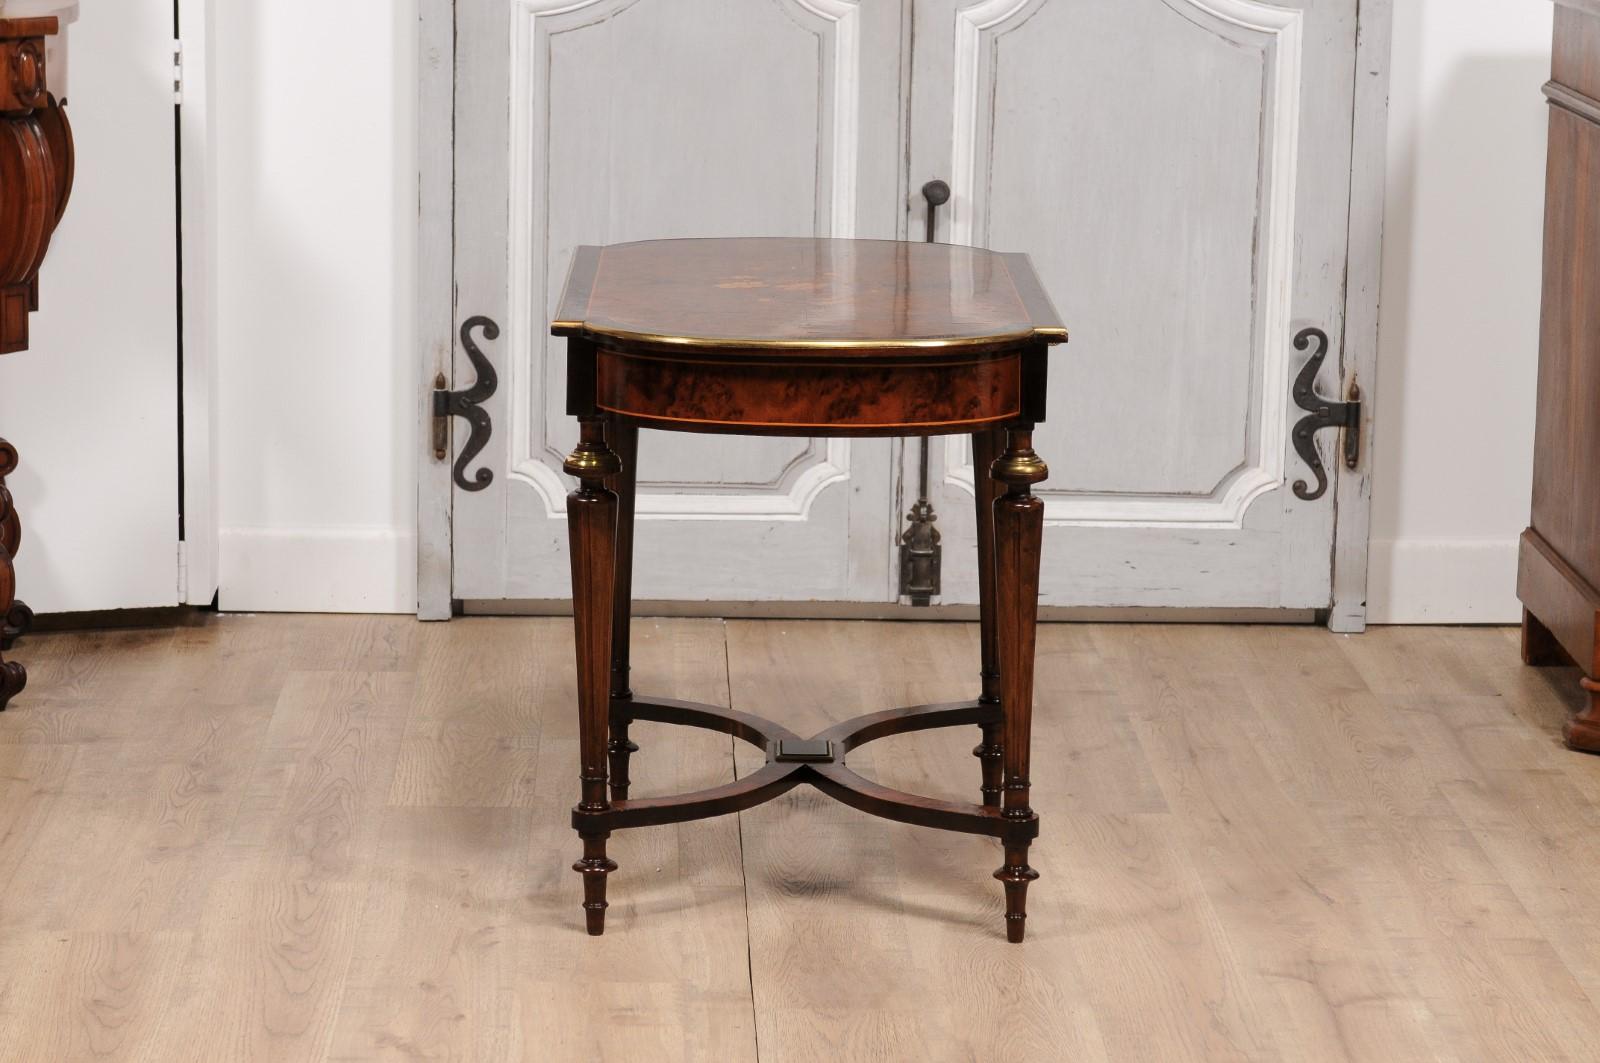 Italian 1890s Walnut, Mahogany and Brass Side Table with Floral Marquetry Décor For Sale 4